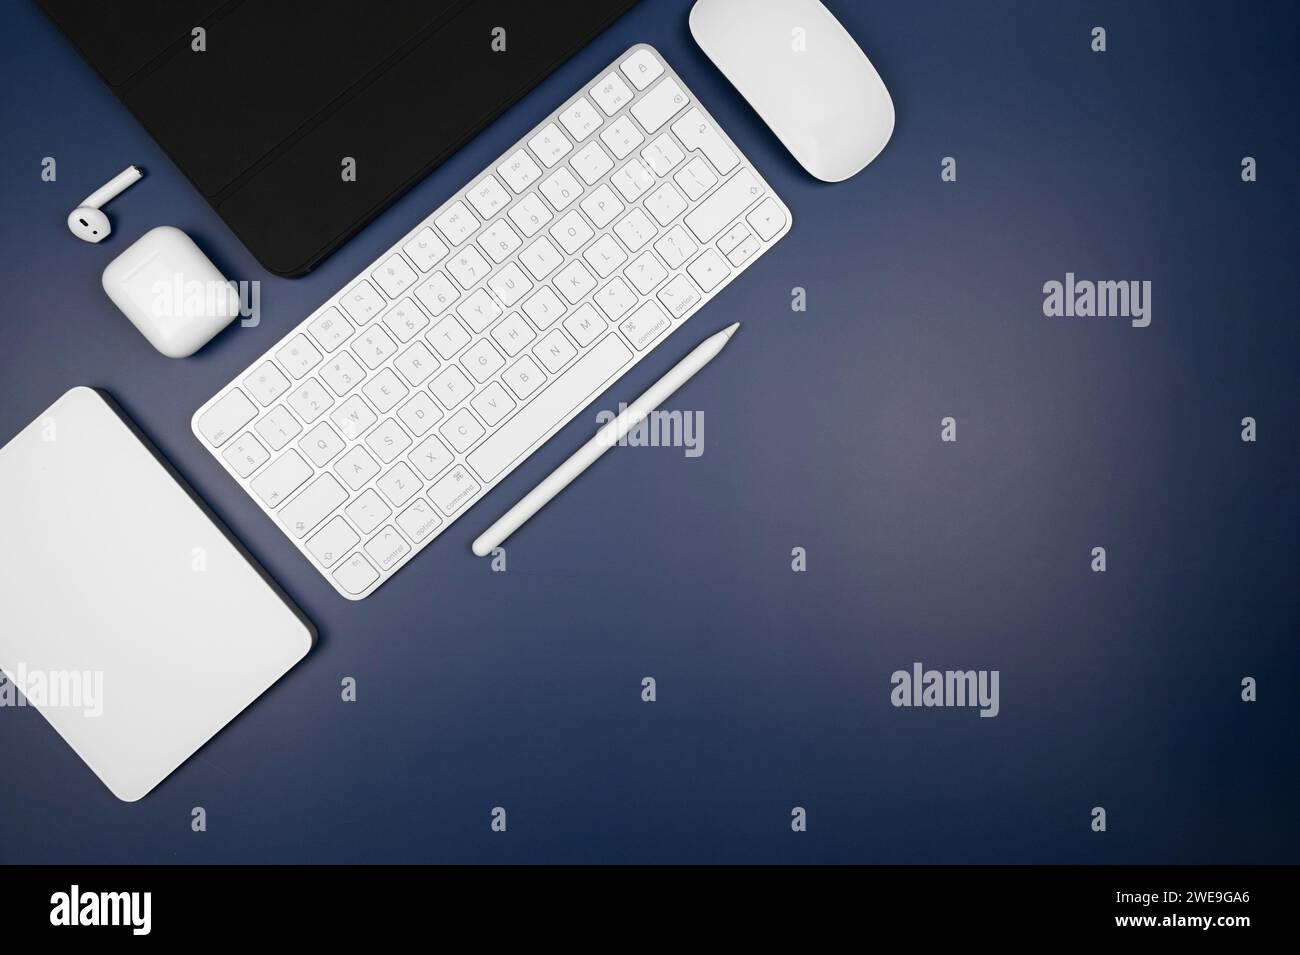 Top view of white keyboard, touchpad, mouse, earphones case and pen on dark blue background. Modern office flat lay, black tablet case, copy space. Stock Photo